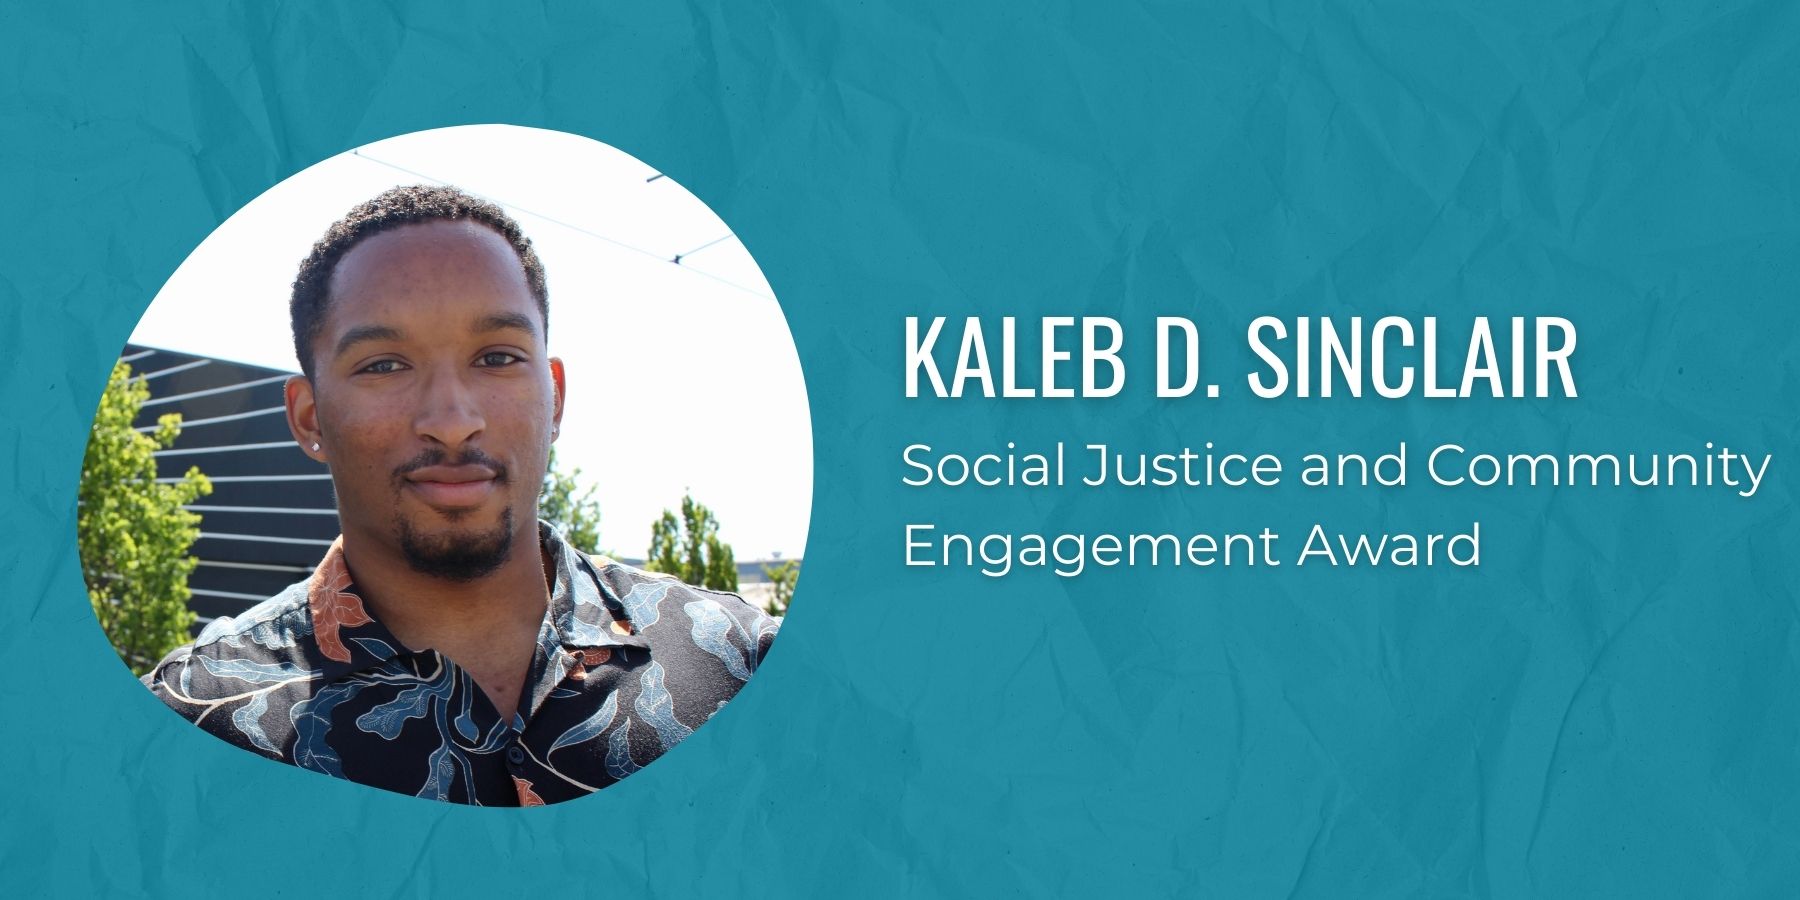 Photo of Kaleb D. Sinclair and text Social Justice and Community Engagement Award